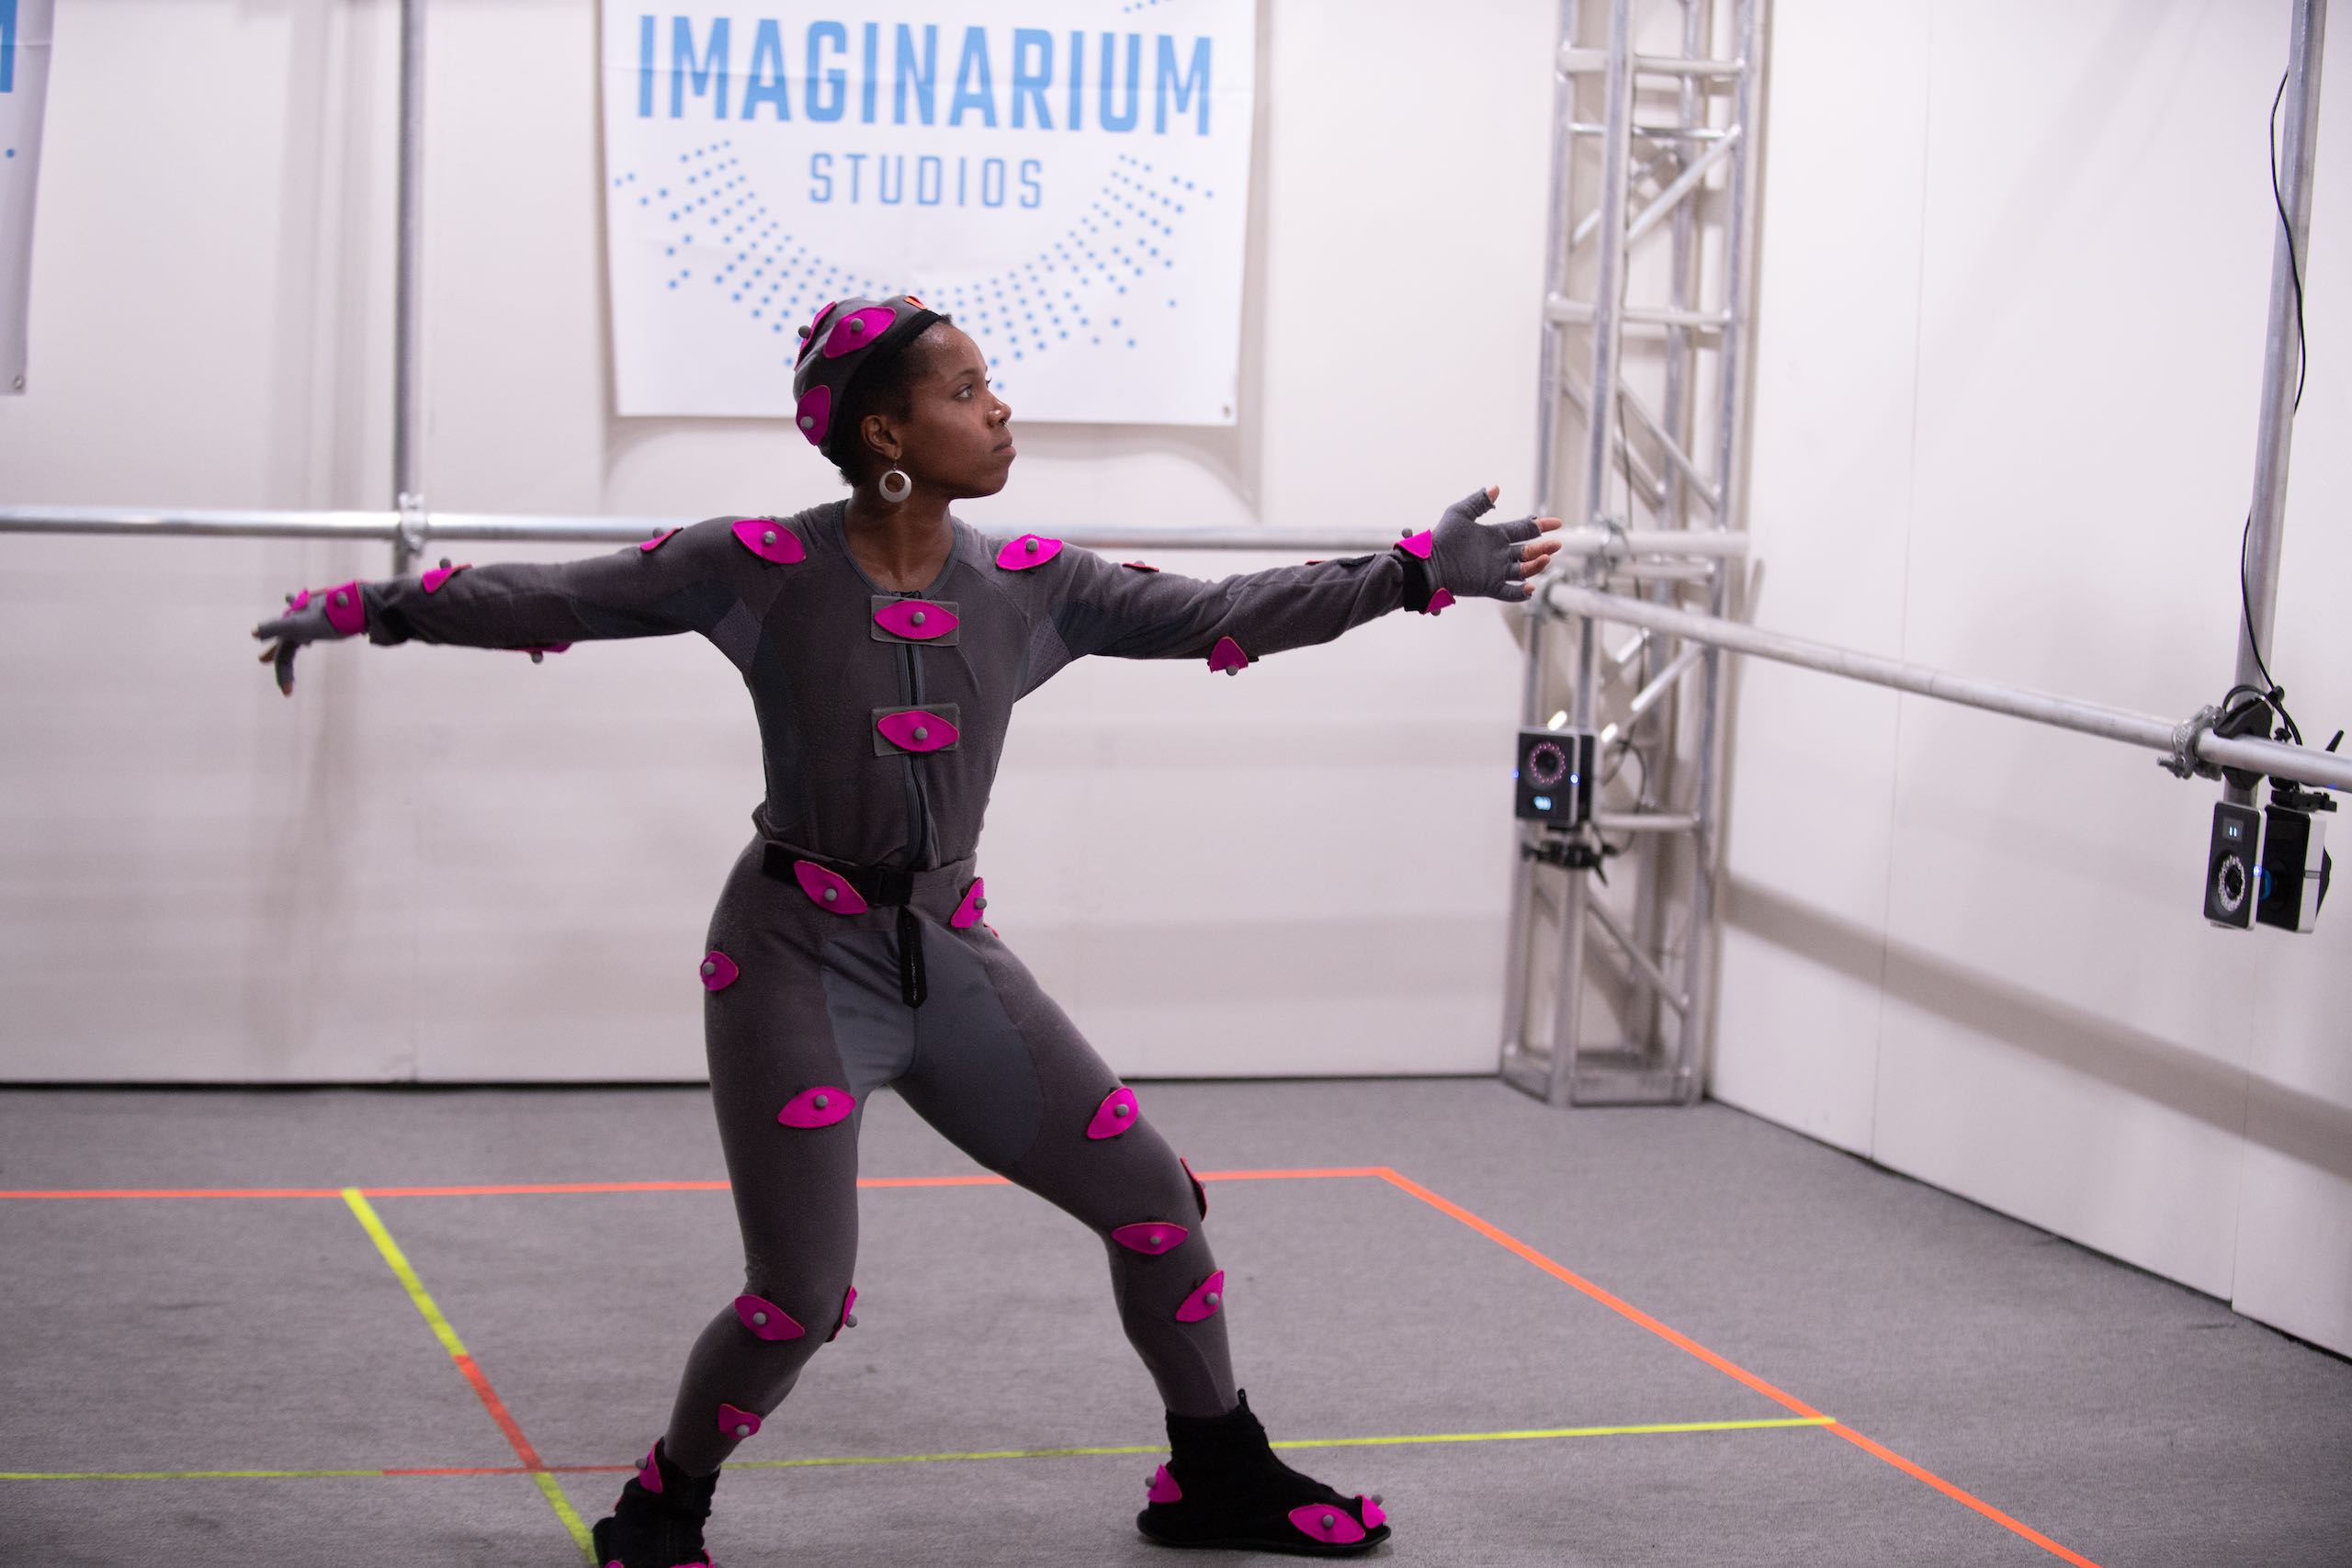 Woman with pink body movement sensors posing with arms outstretched in front of The Imaginarium Studios sign